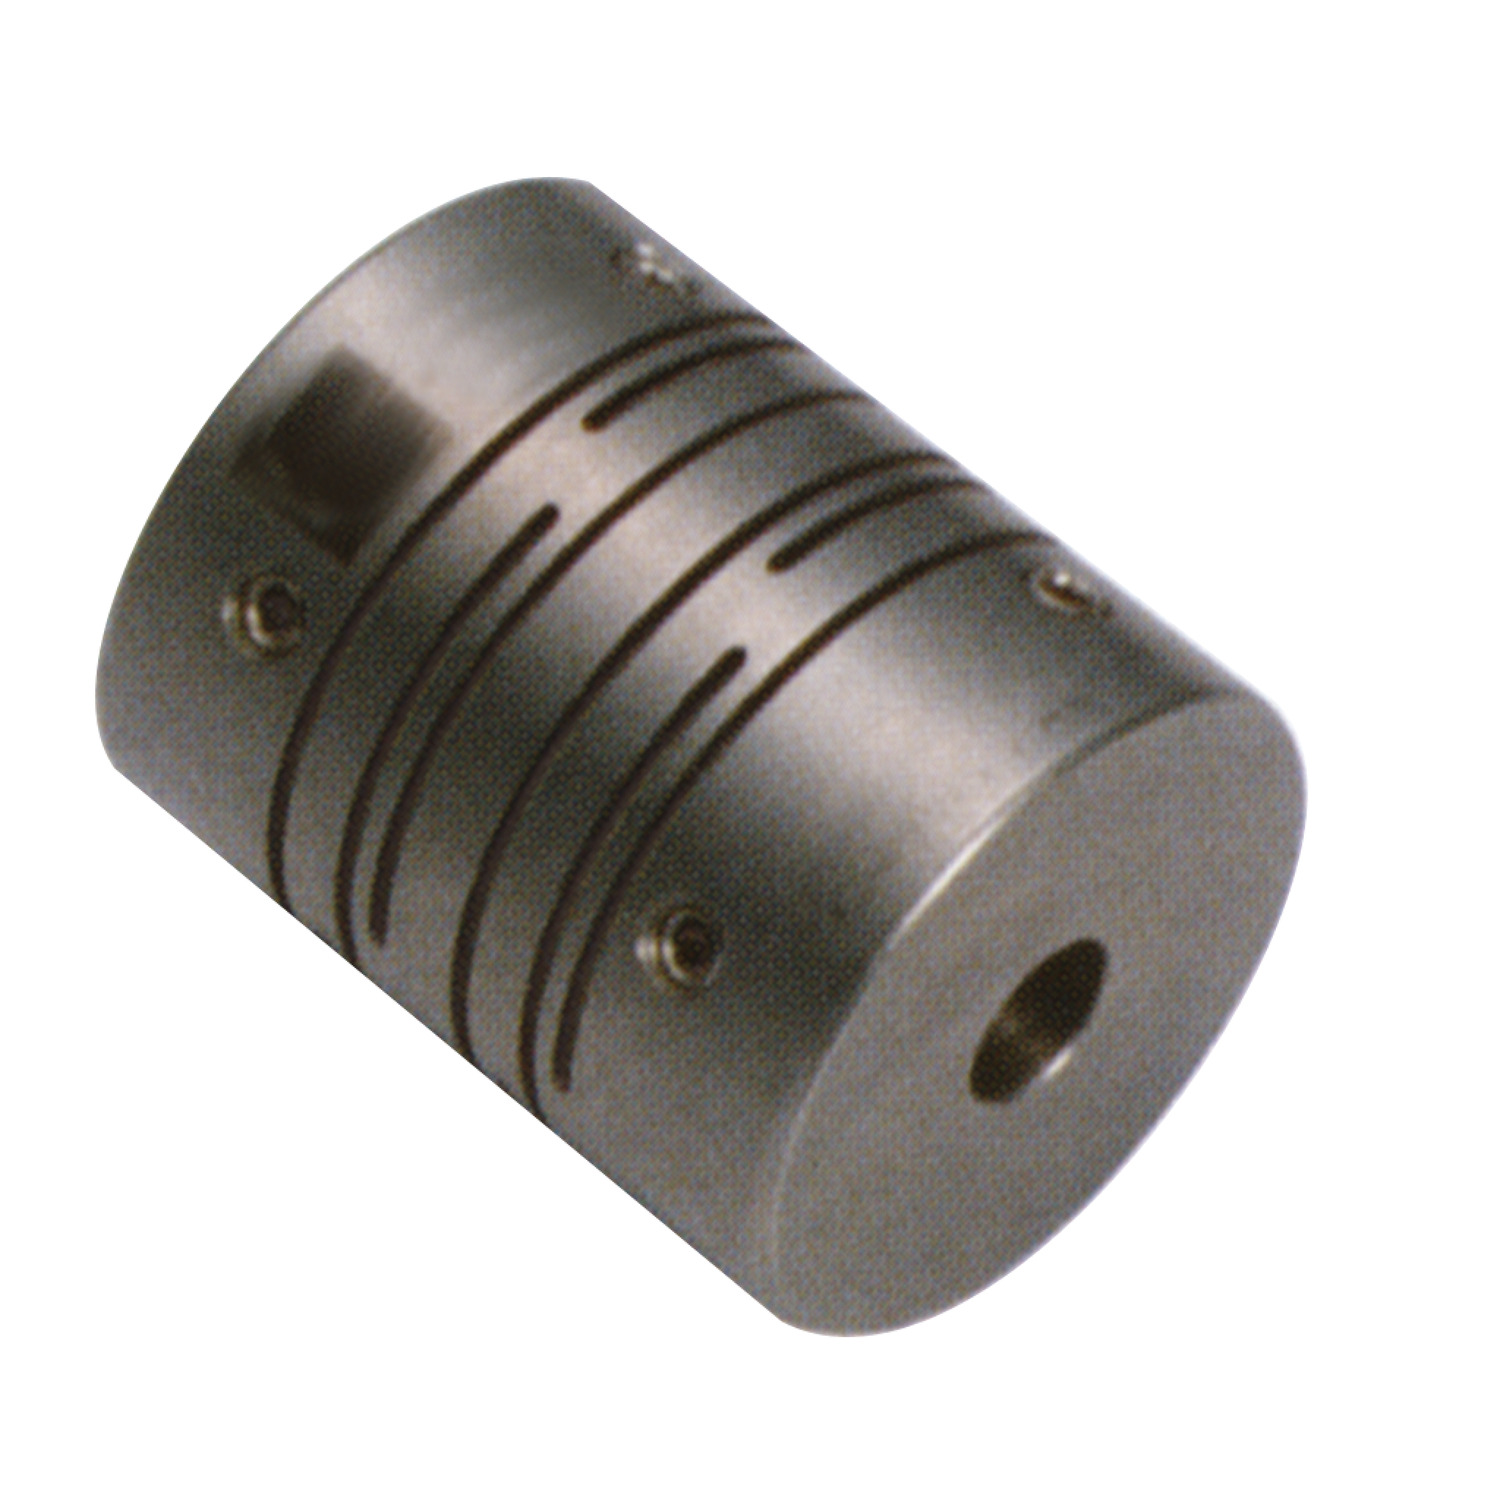 R3002.2 Spiral Beam Coupling - Stainless Steel